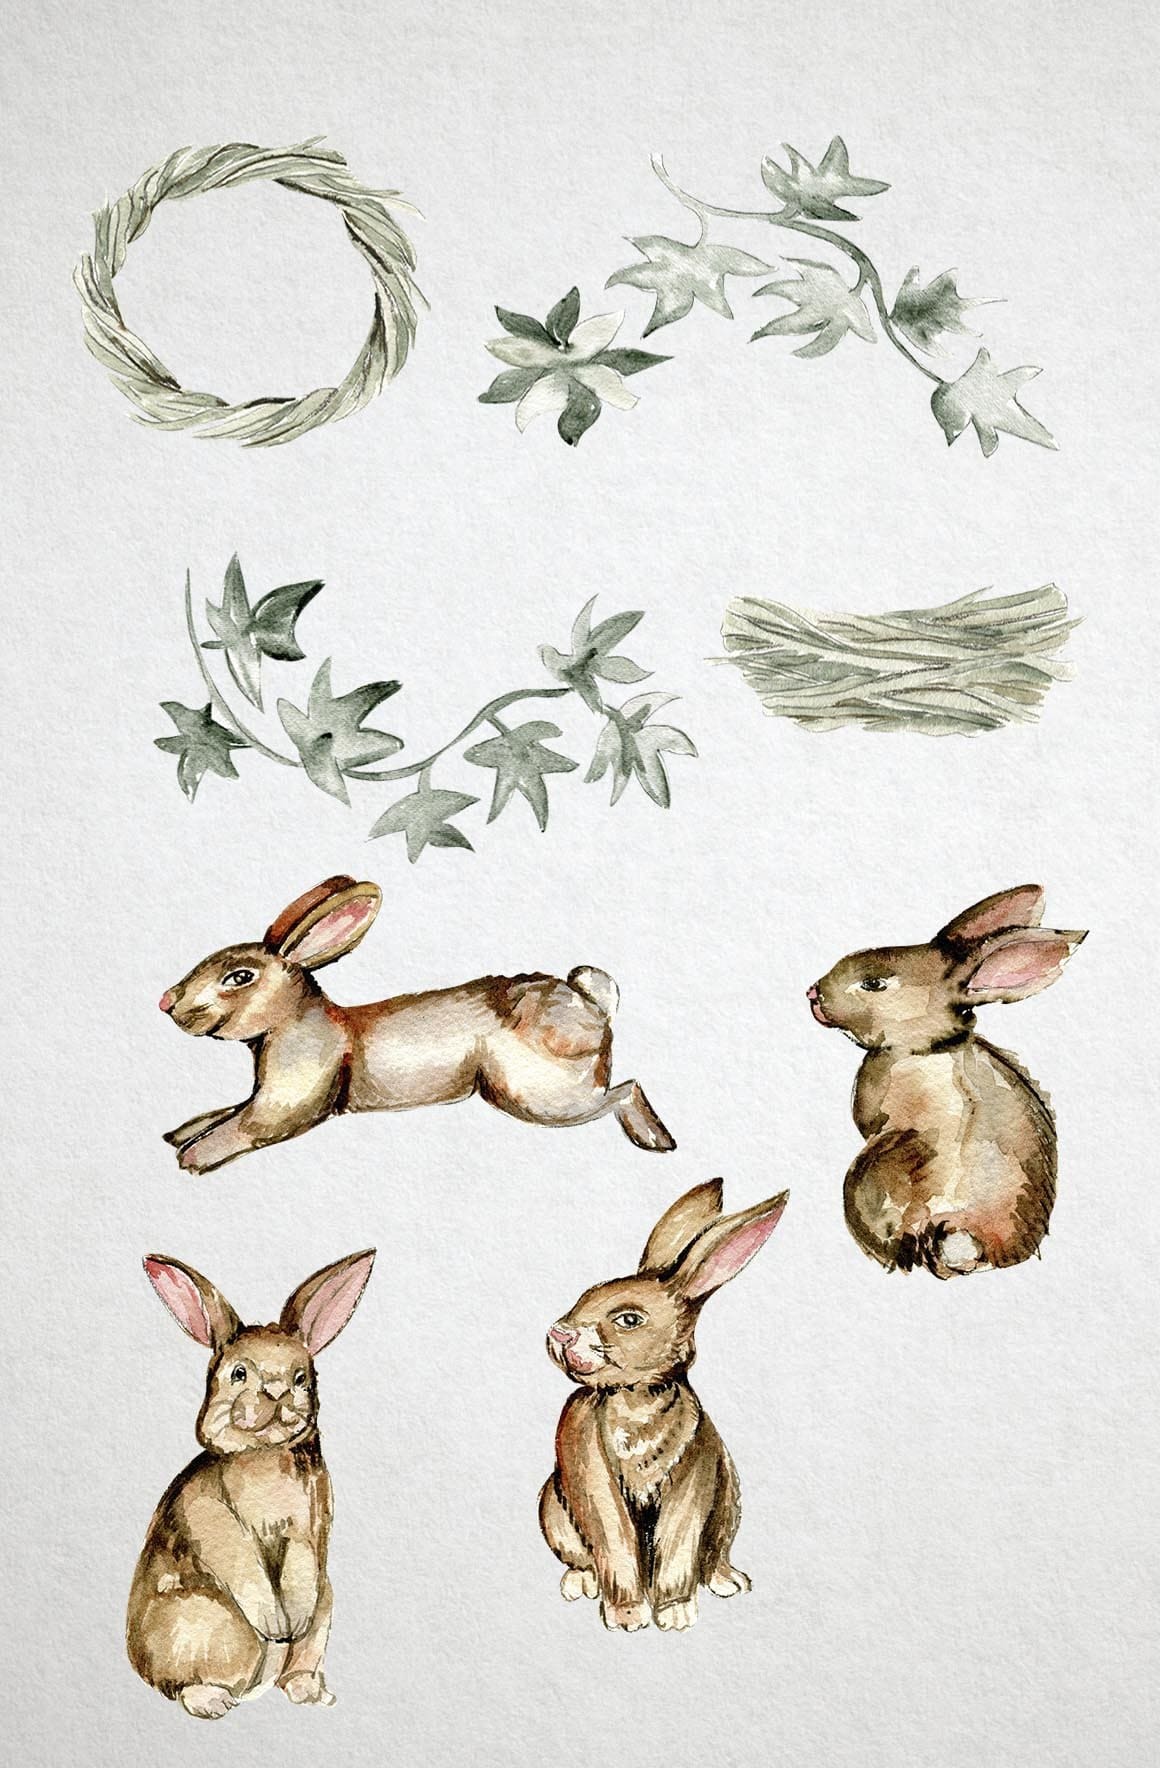 Watercolor drawings of hares in motion.